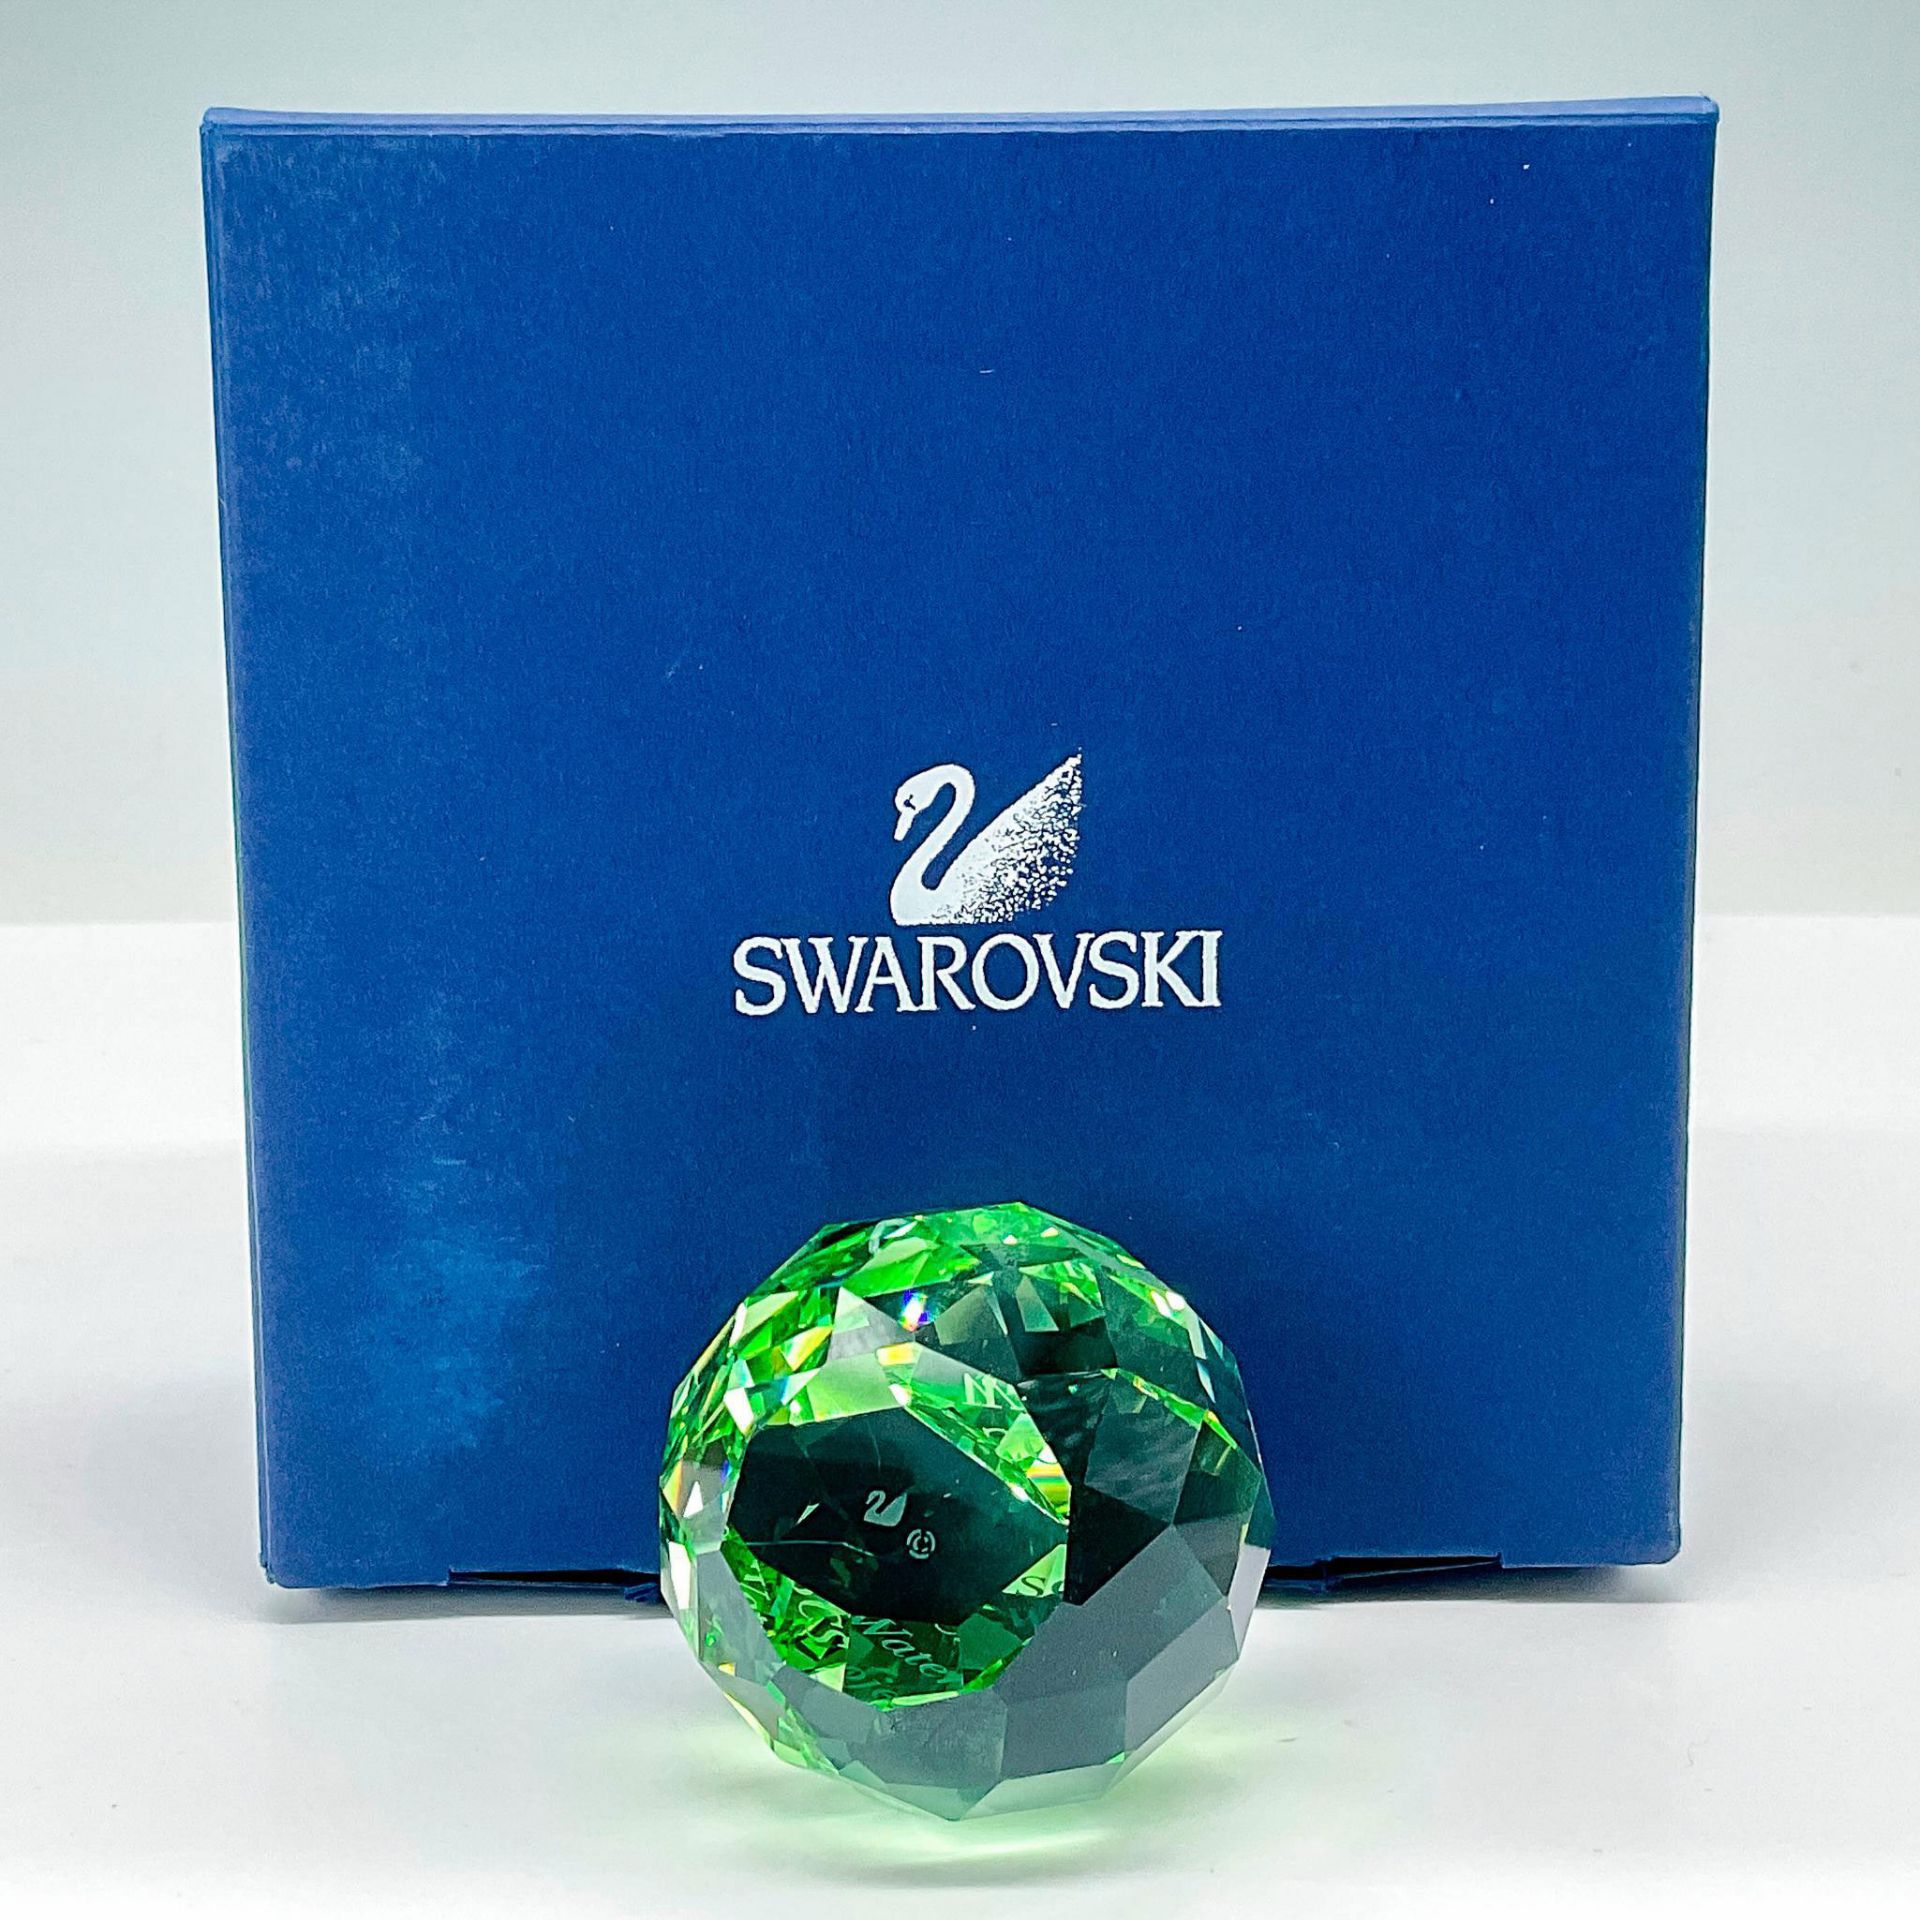 Swarovski SCS Crystal Paperweight Water Project - Image 3 of 3